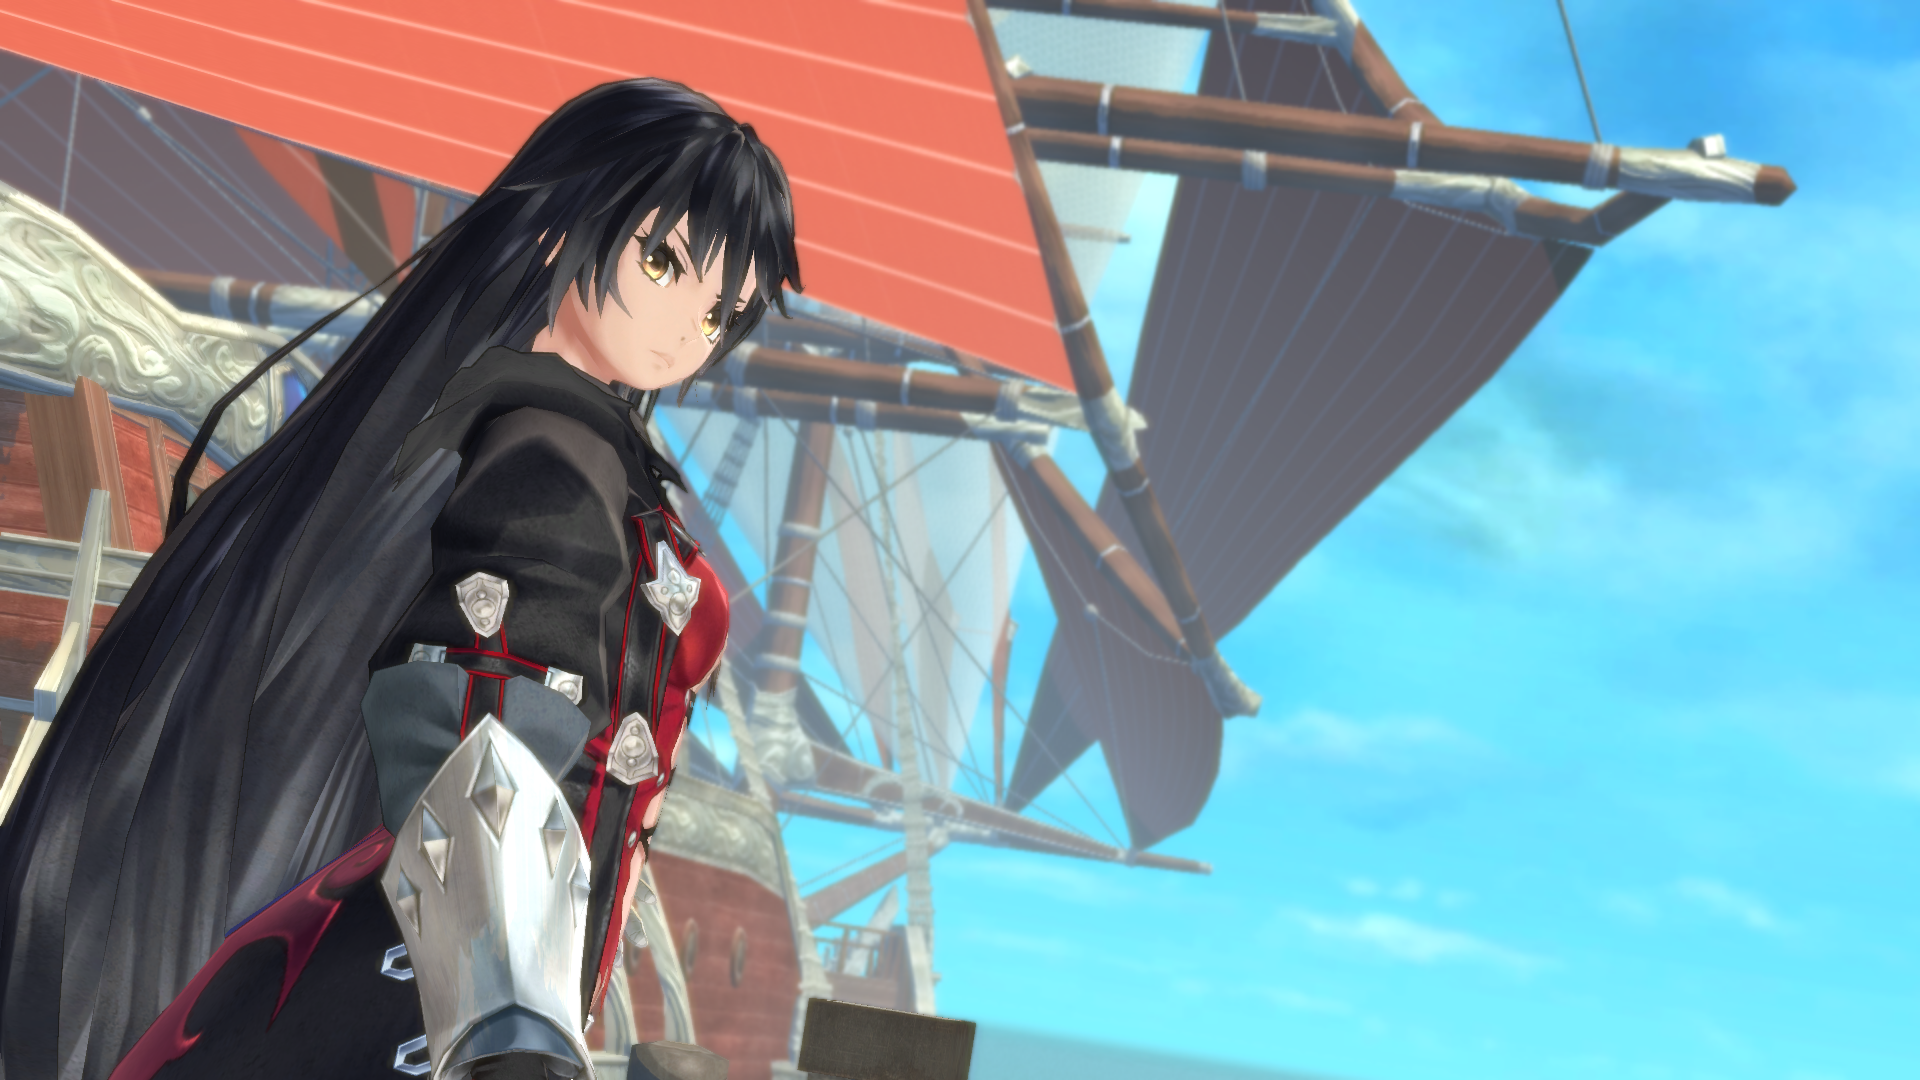 Tales Of Berseria Backgrounds, Compatible - PC, Mobile, Gadgets| 1920x1080 px